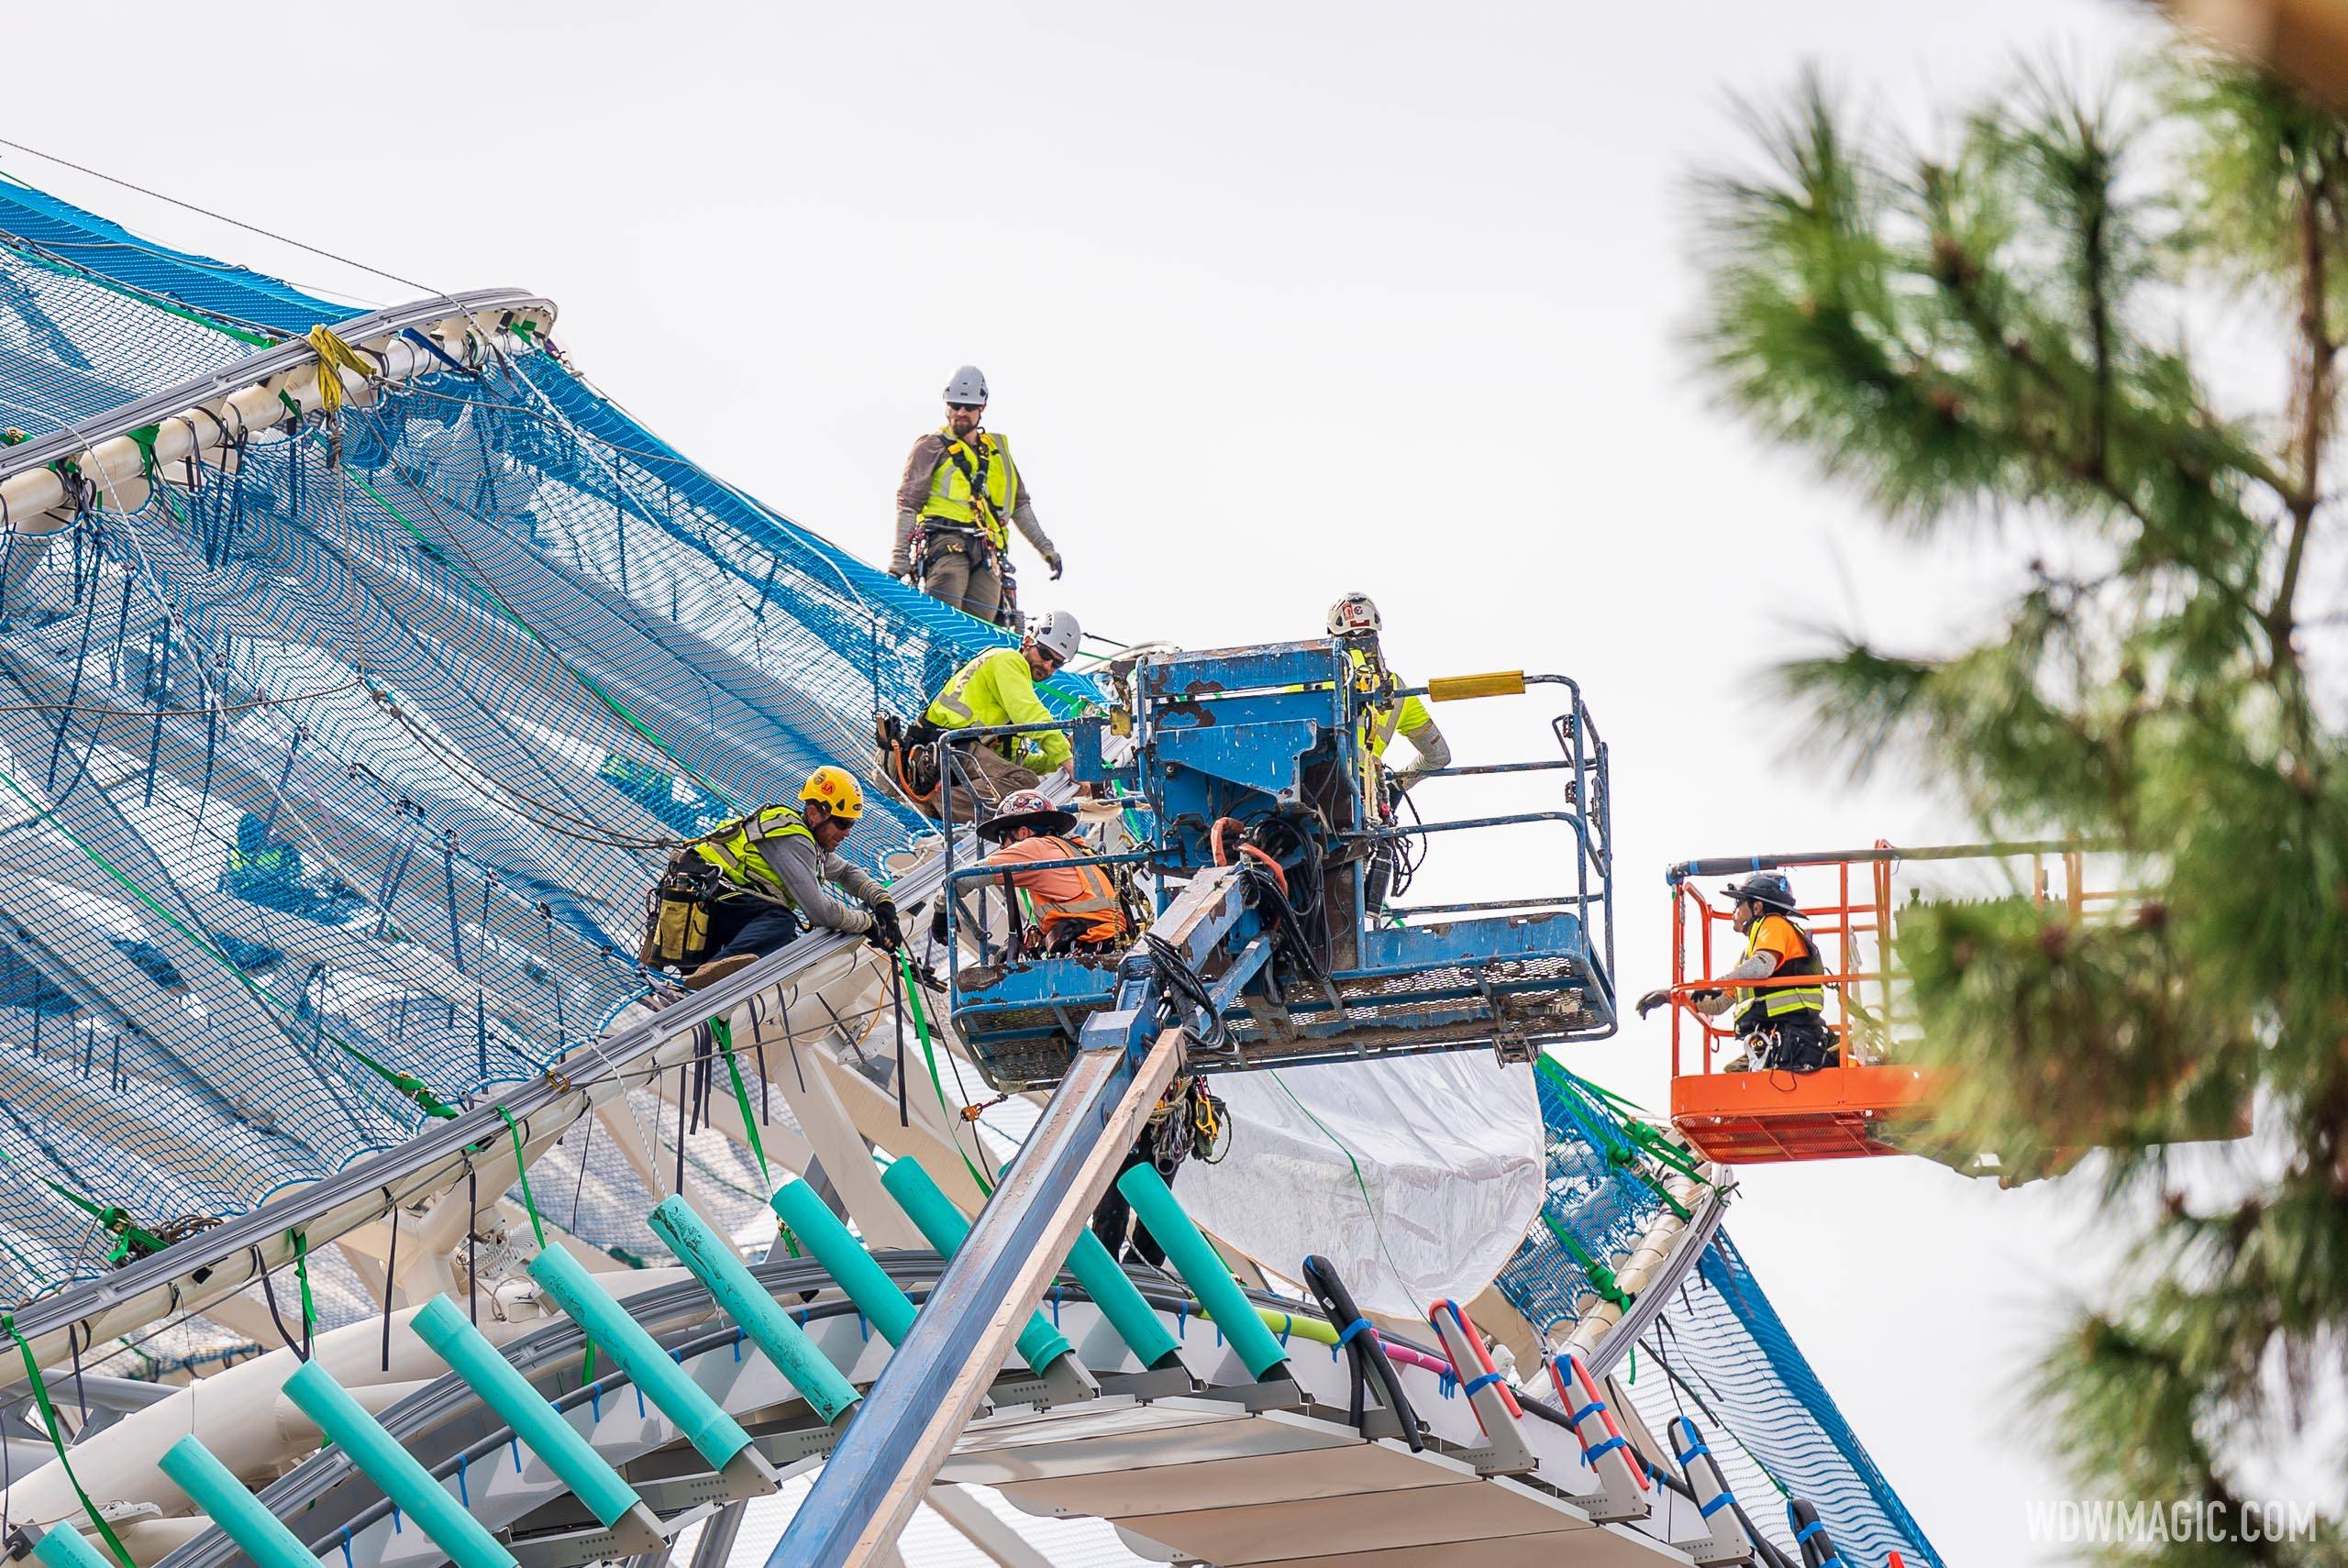 Crews installing the largest and highest section of canopy at TRON Lightcycle Run in Magic Kingdom